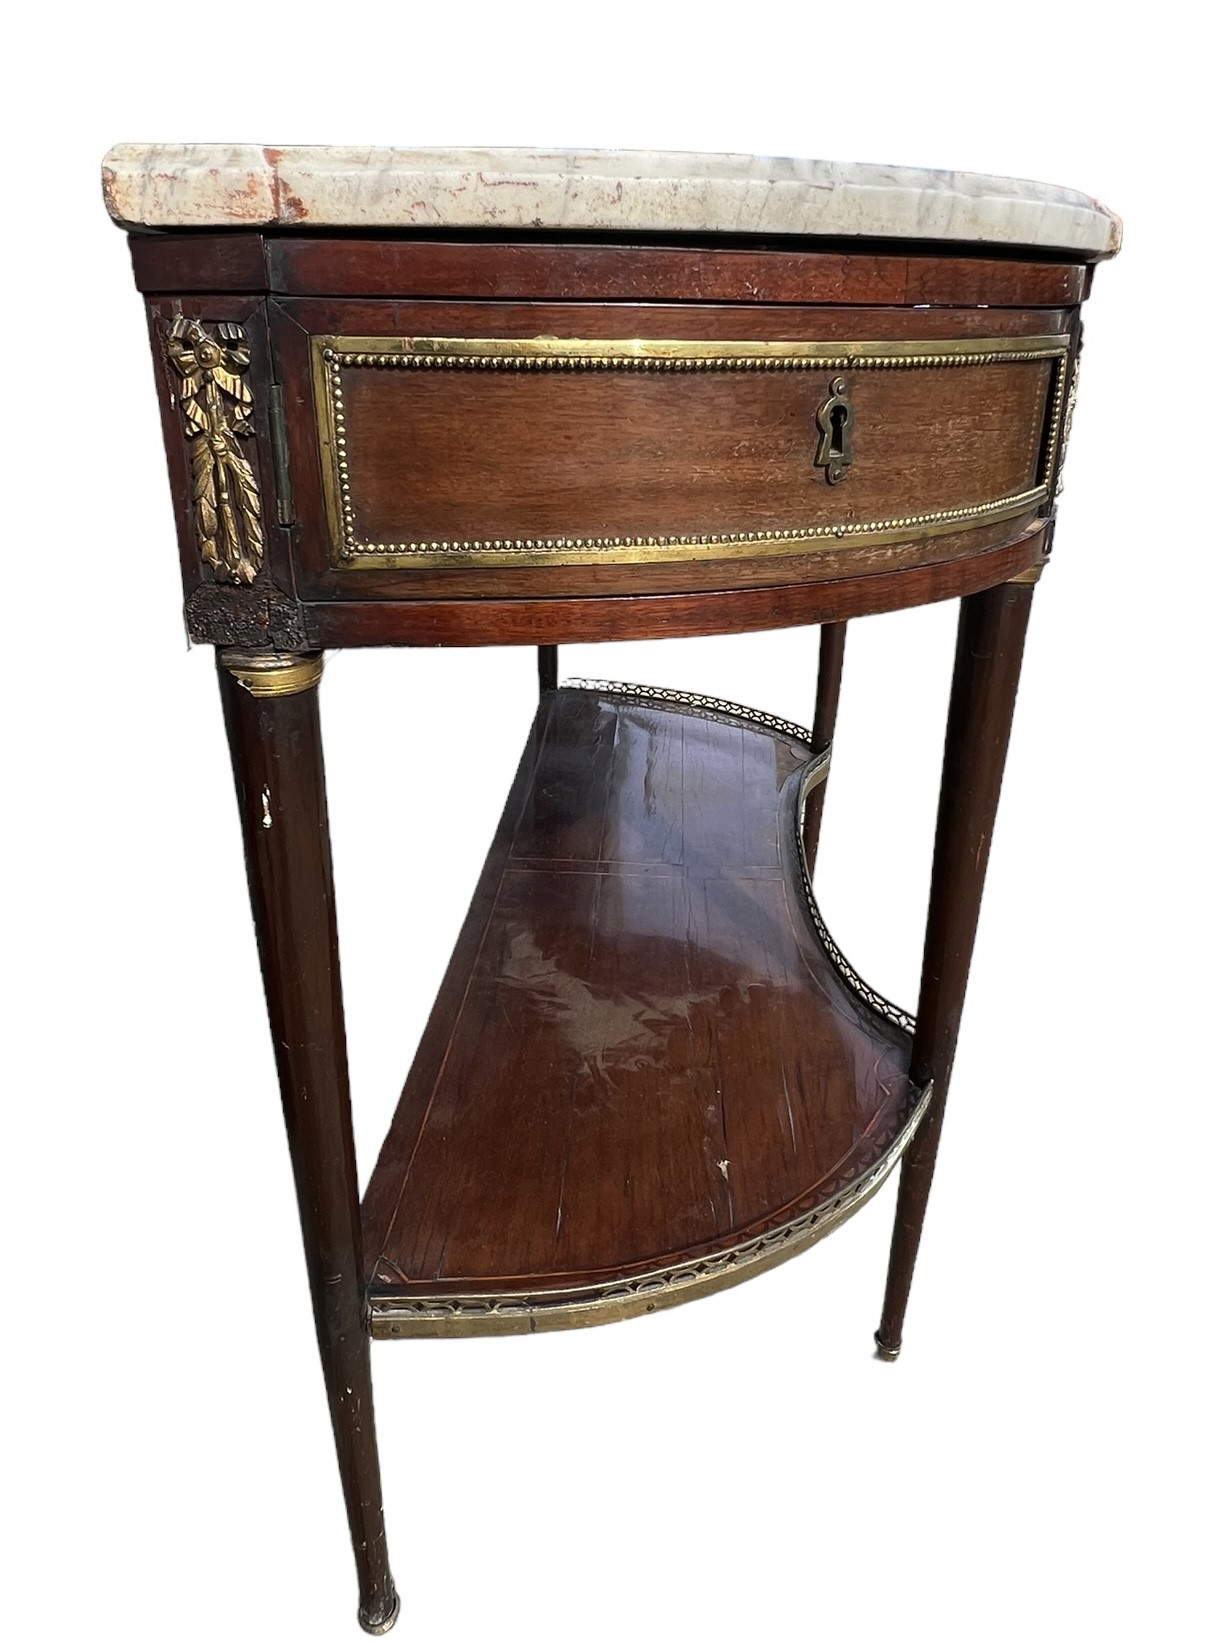 AN 18TH CENTURY FRENCH LOUIS XI PERIOD MAHOGANY AND GILT METAL MOUNTED DESSERT CONSOLE TABLE - Image 3 of 9